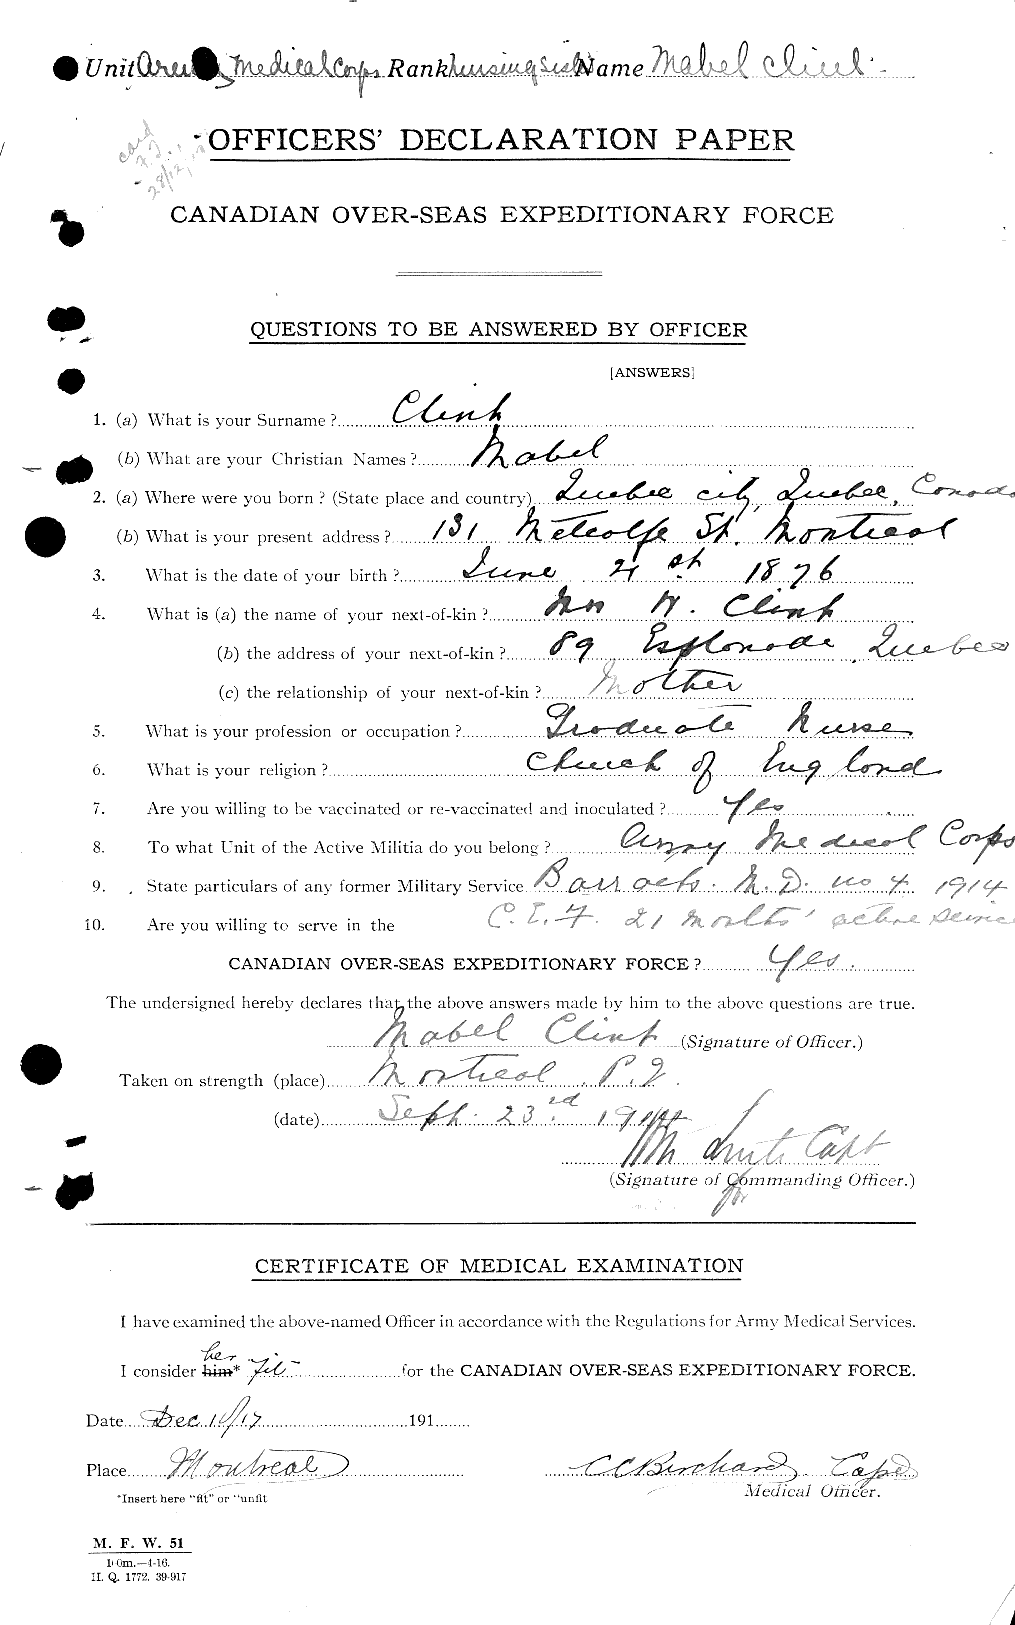 Personnel Records of the First World War - CEF 029138a